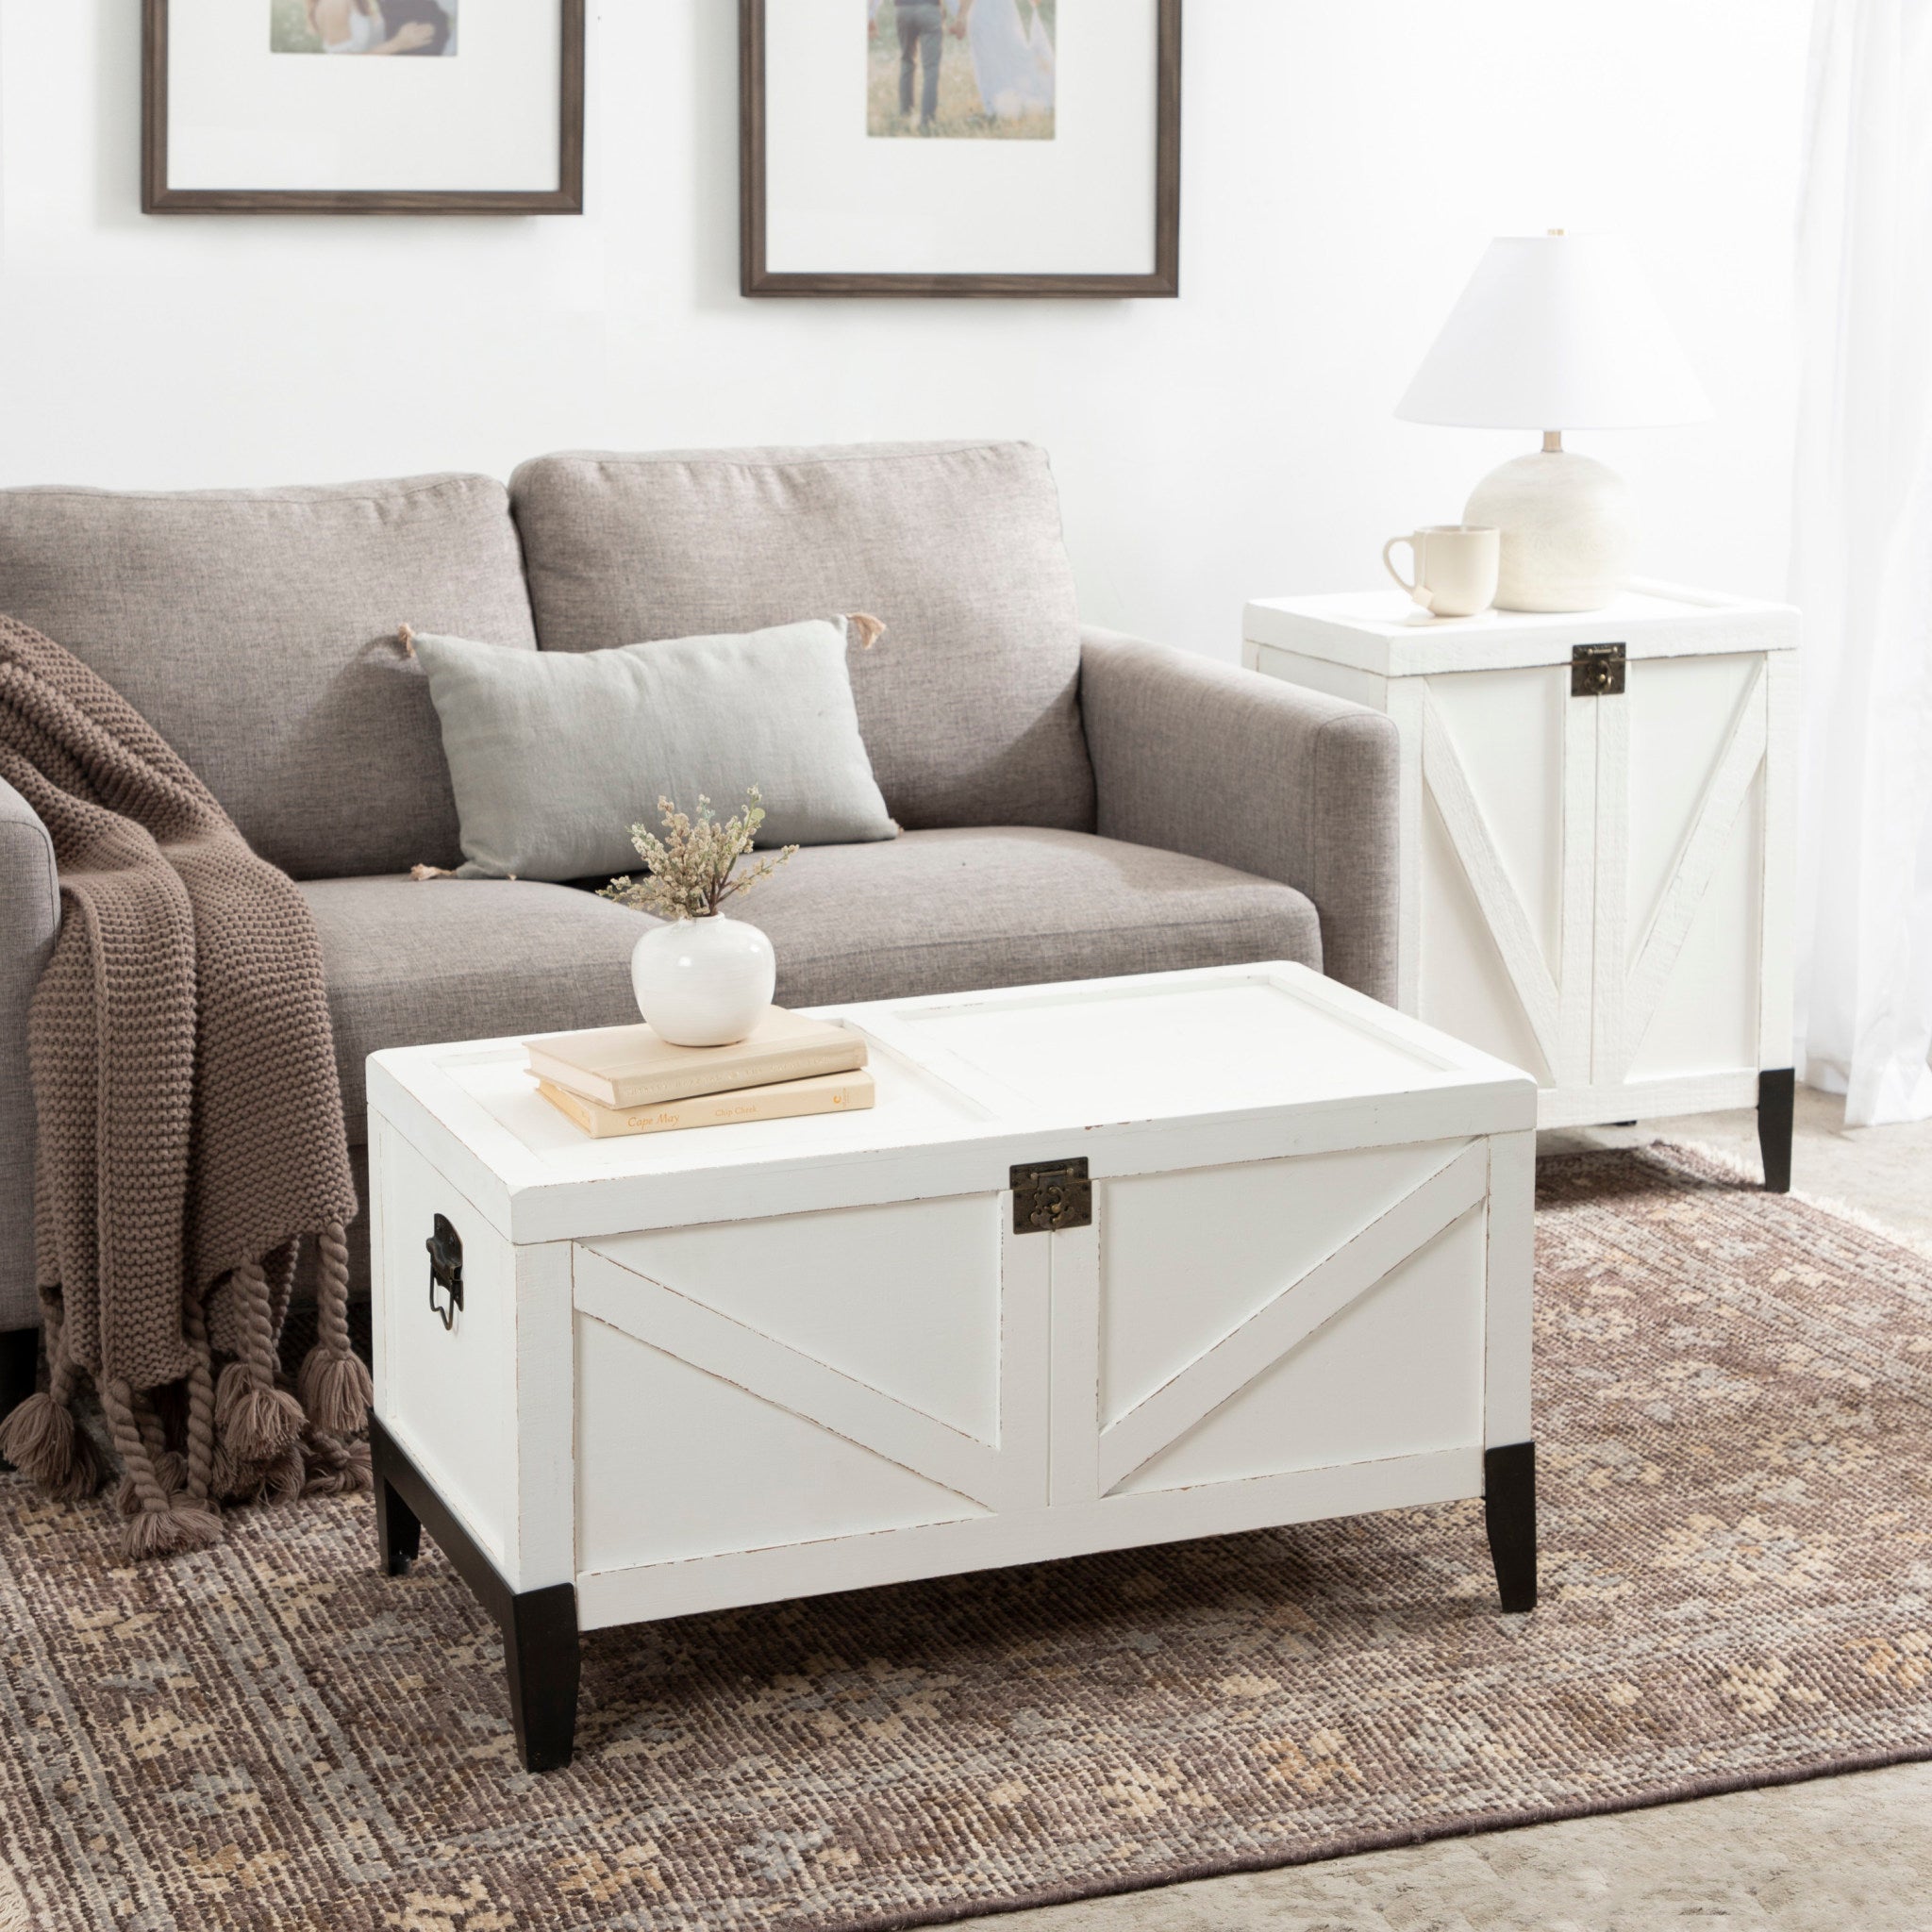 Cates Wood Coffee Table with Trunk Storage